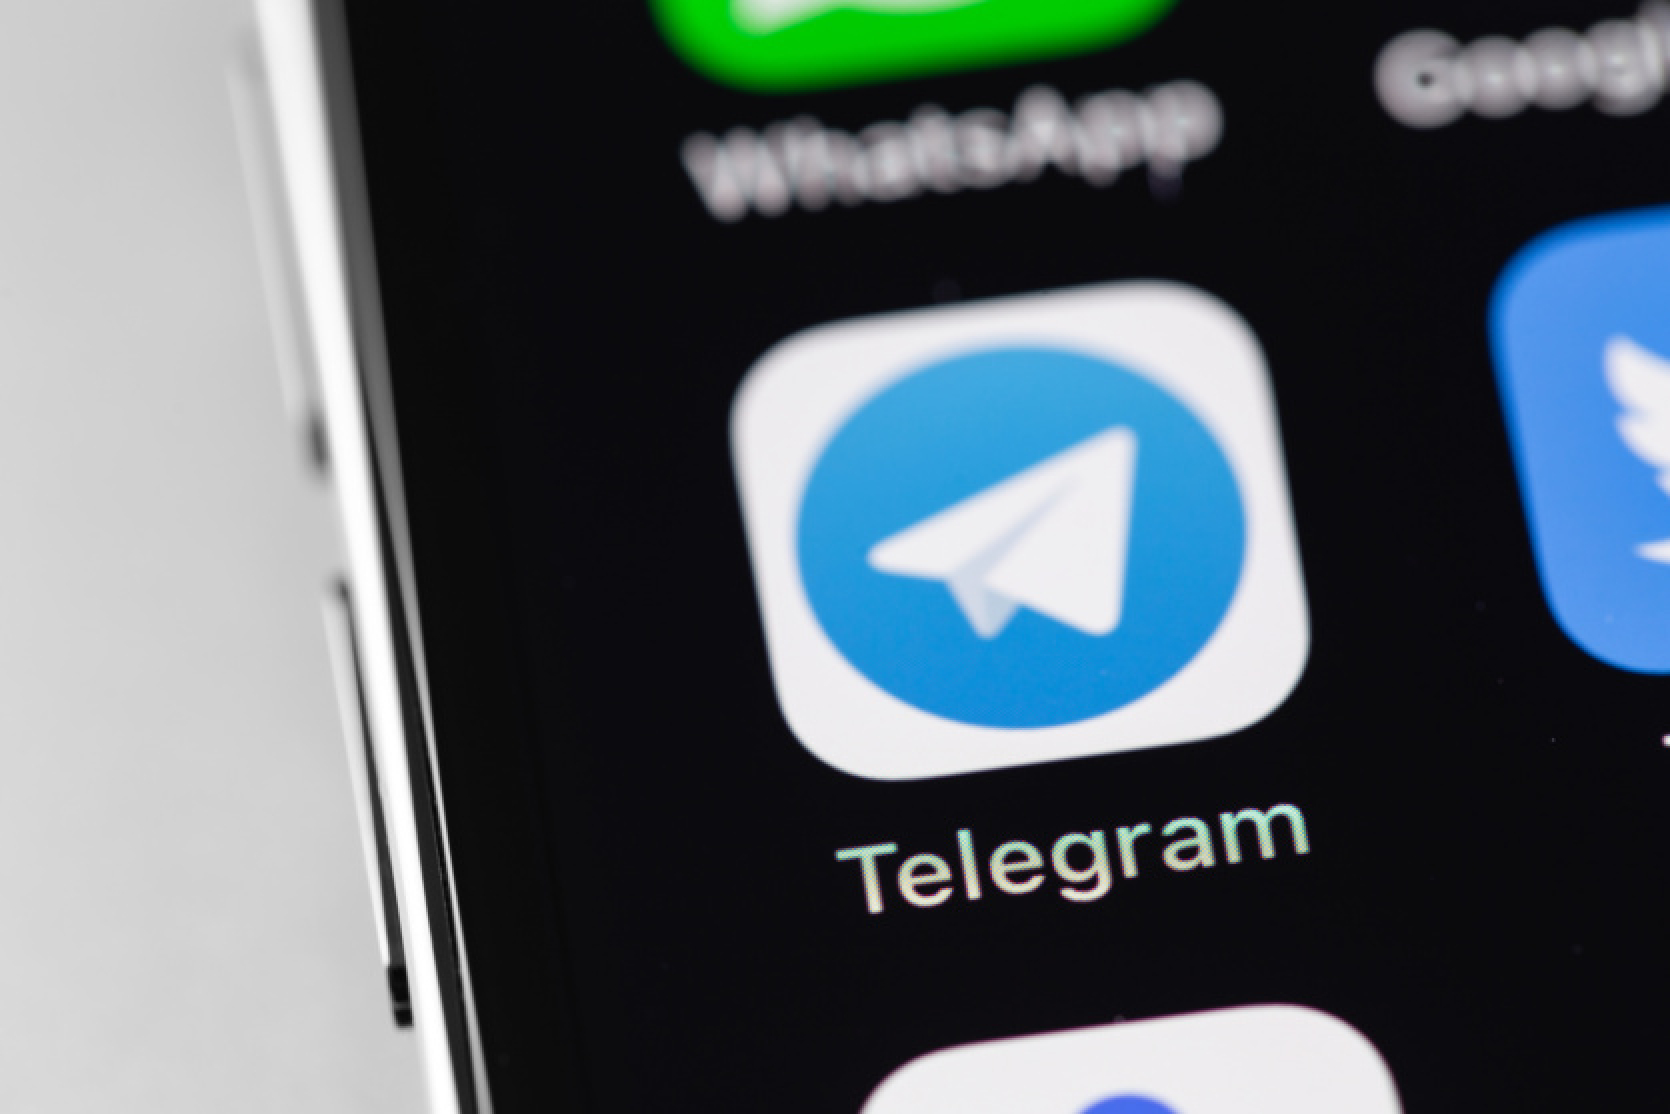 MPs propose to regulate Telegram and other information sharing platforms